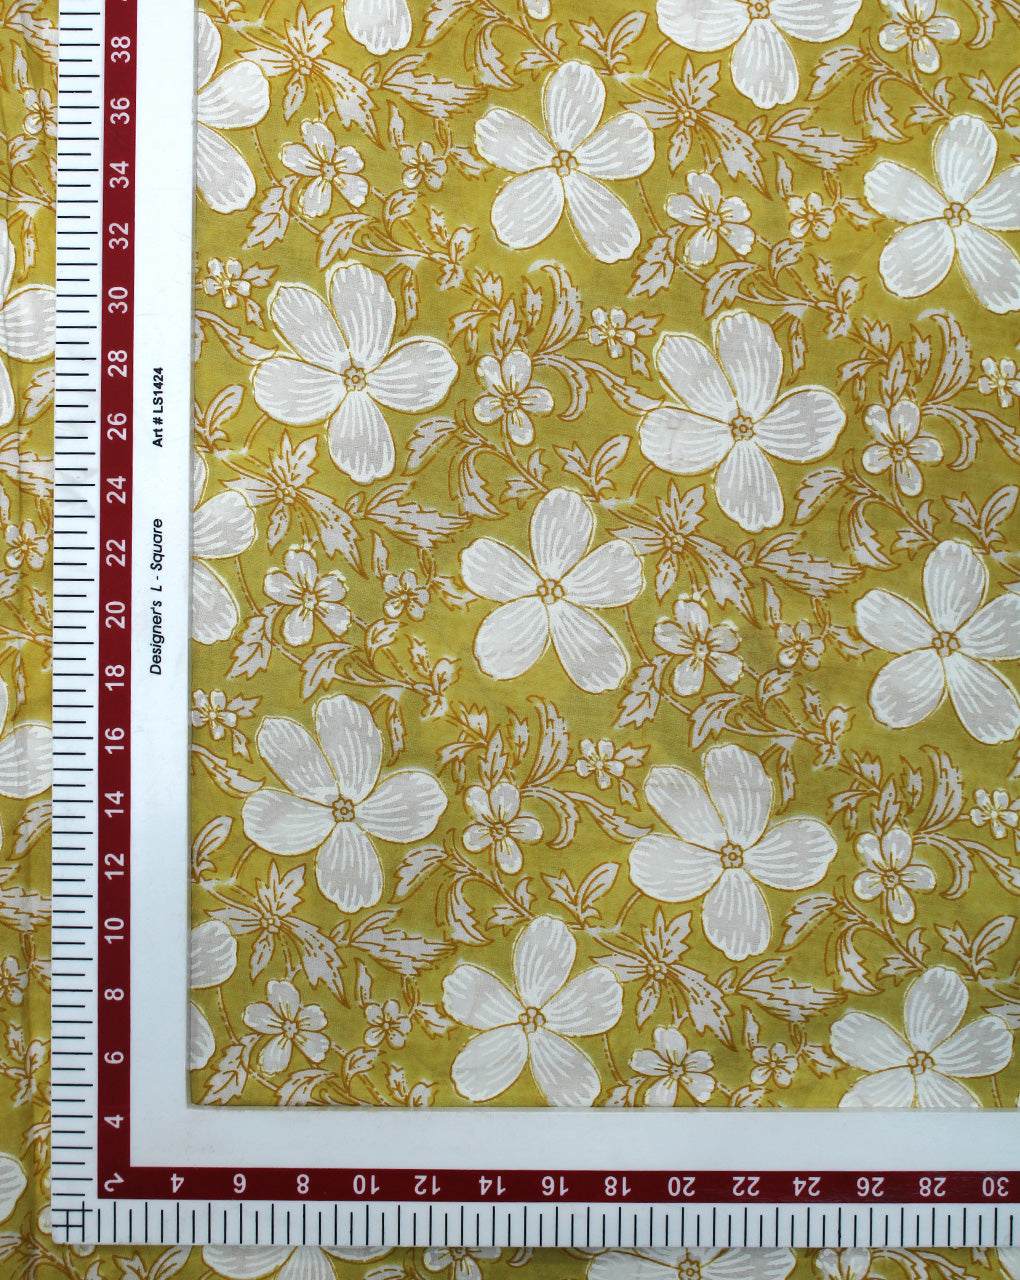 YELLOW FLORAL DESIGN COTTON PRINTED FABRIC